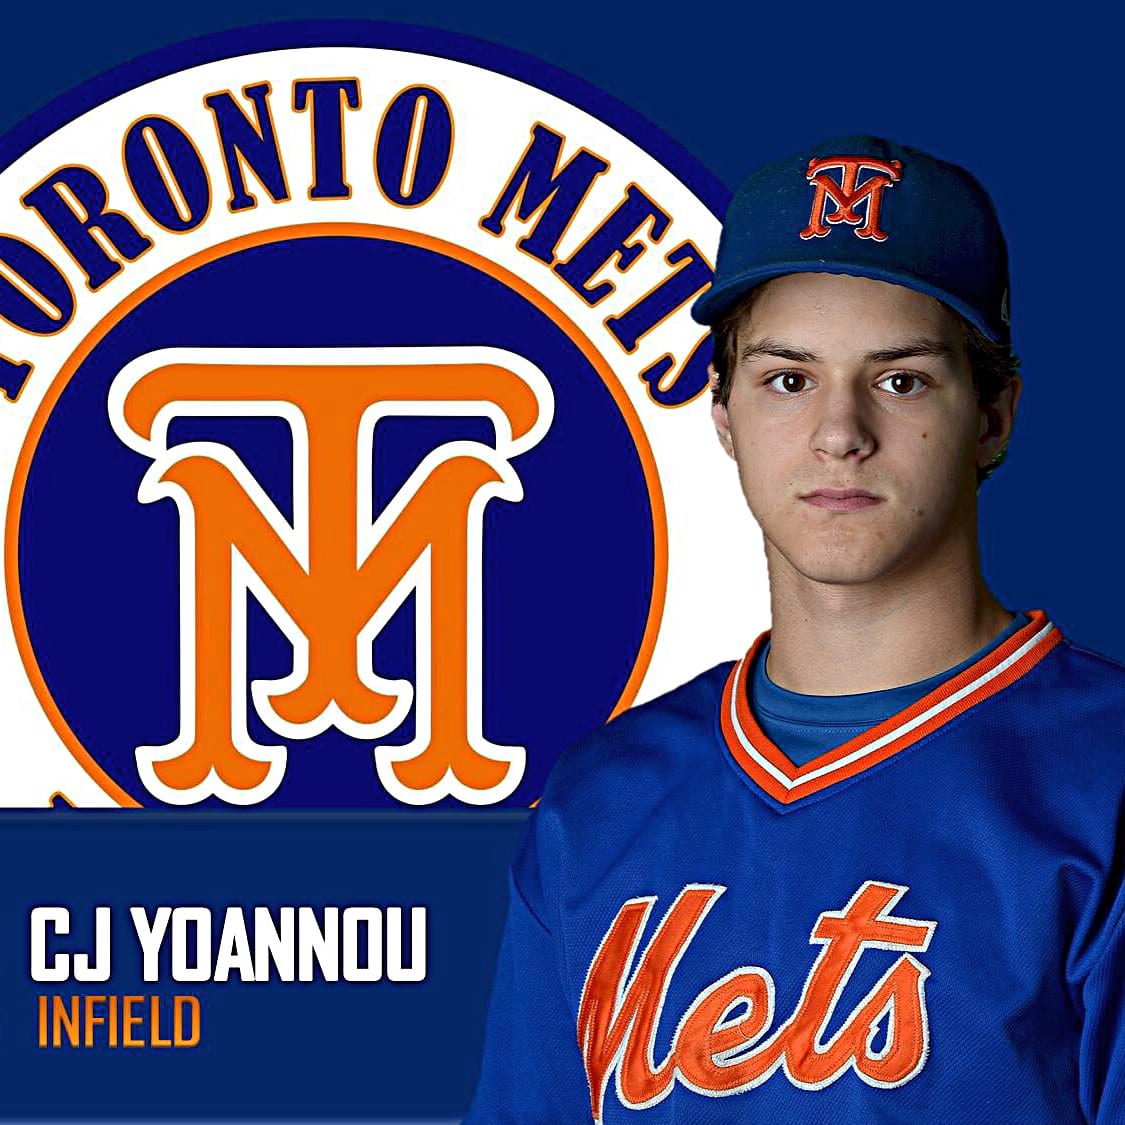 Christopher Yoannou participated in the Toronto Mets Development program prior to joining the 16U at 2015 